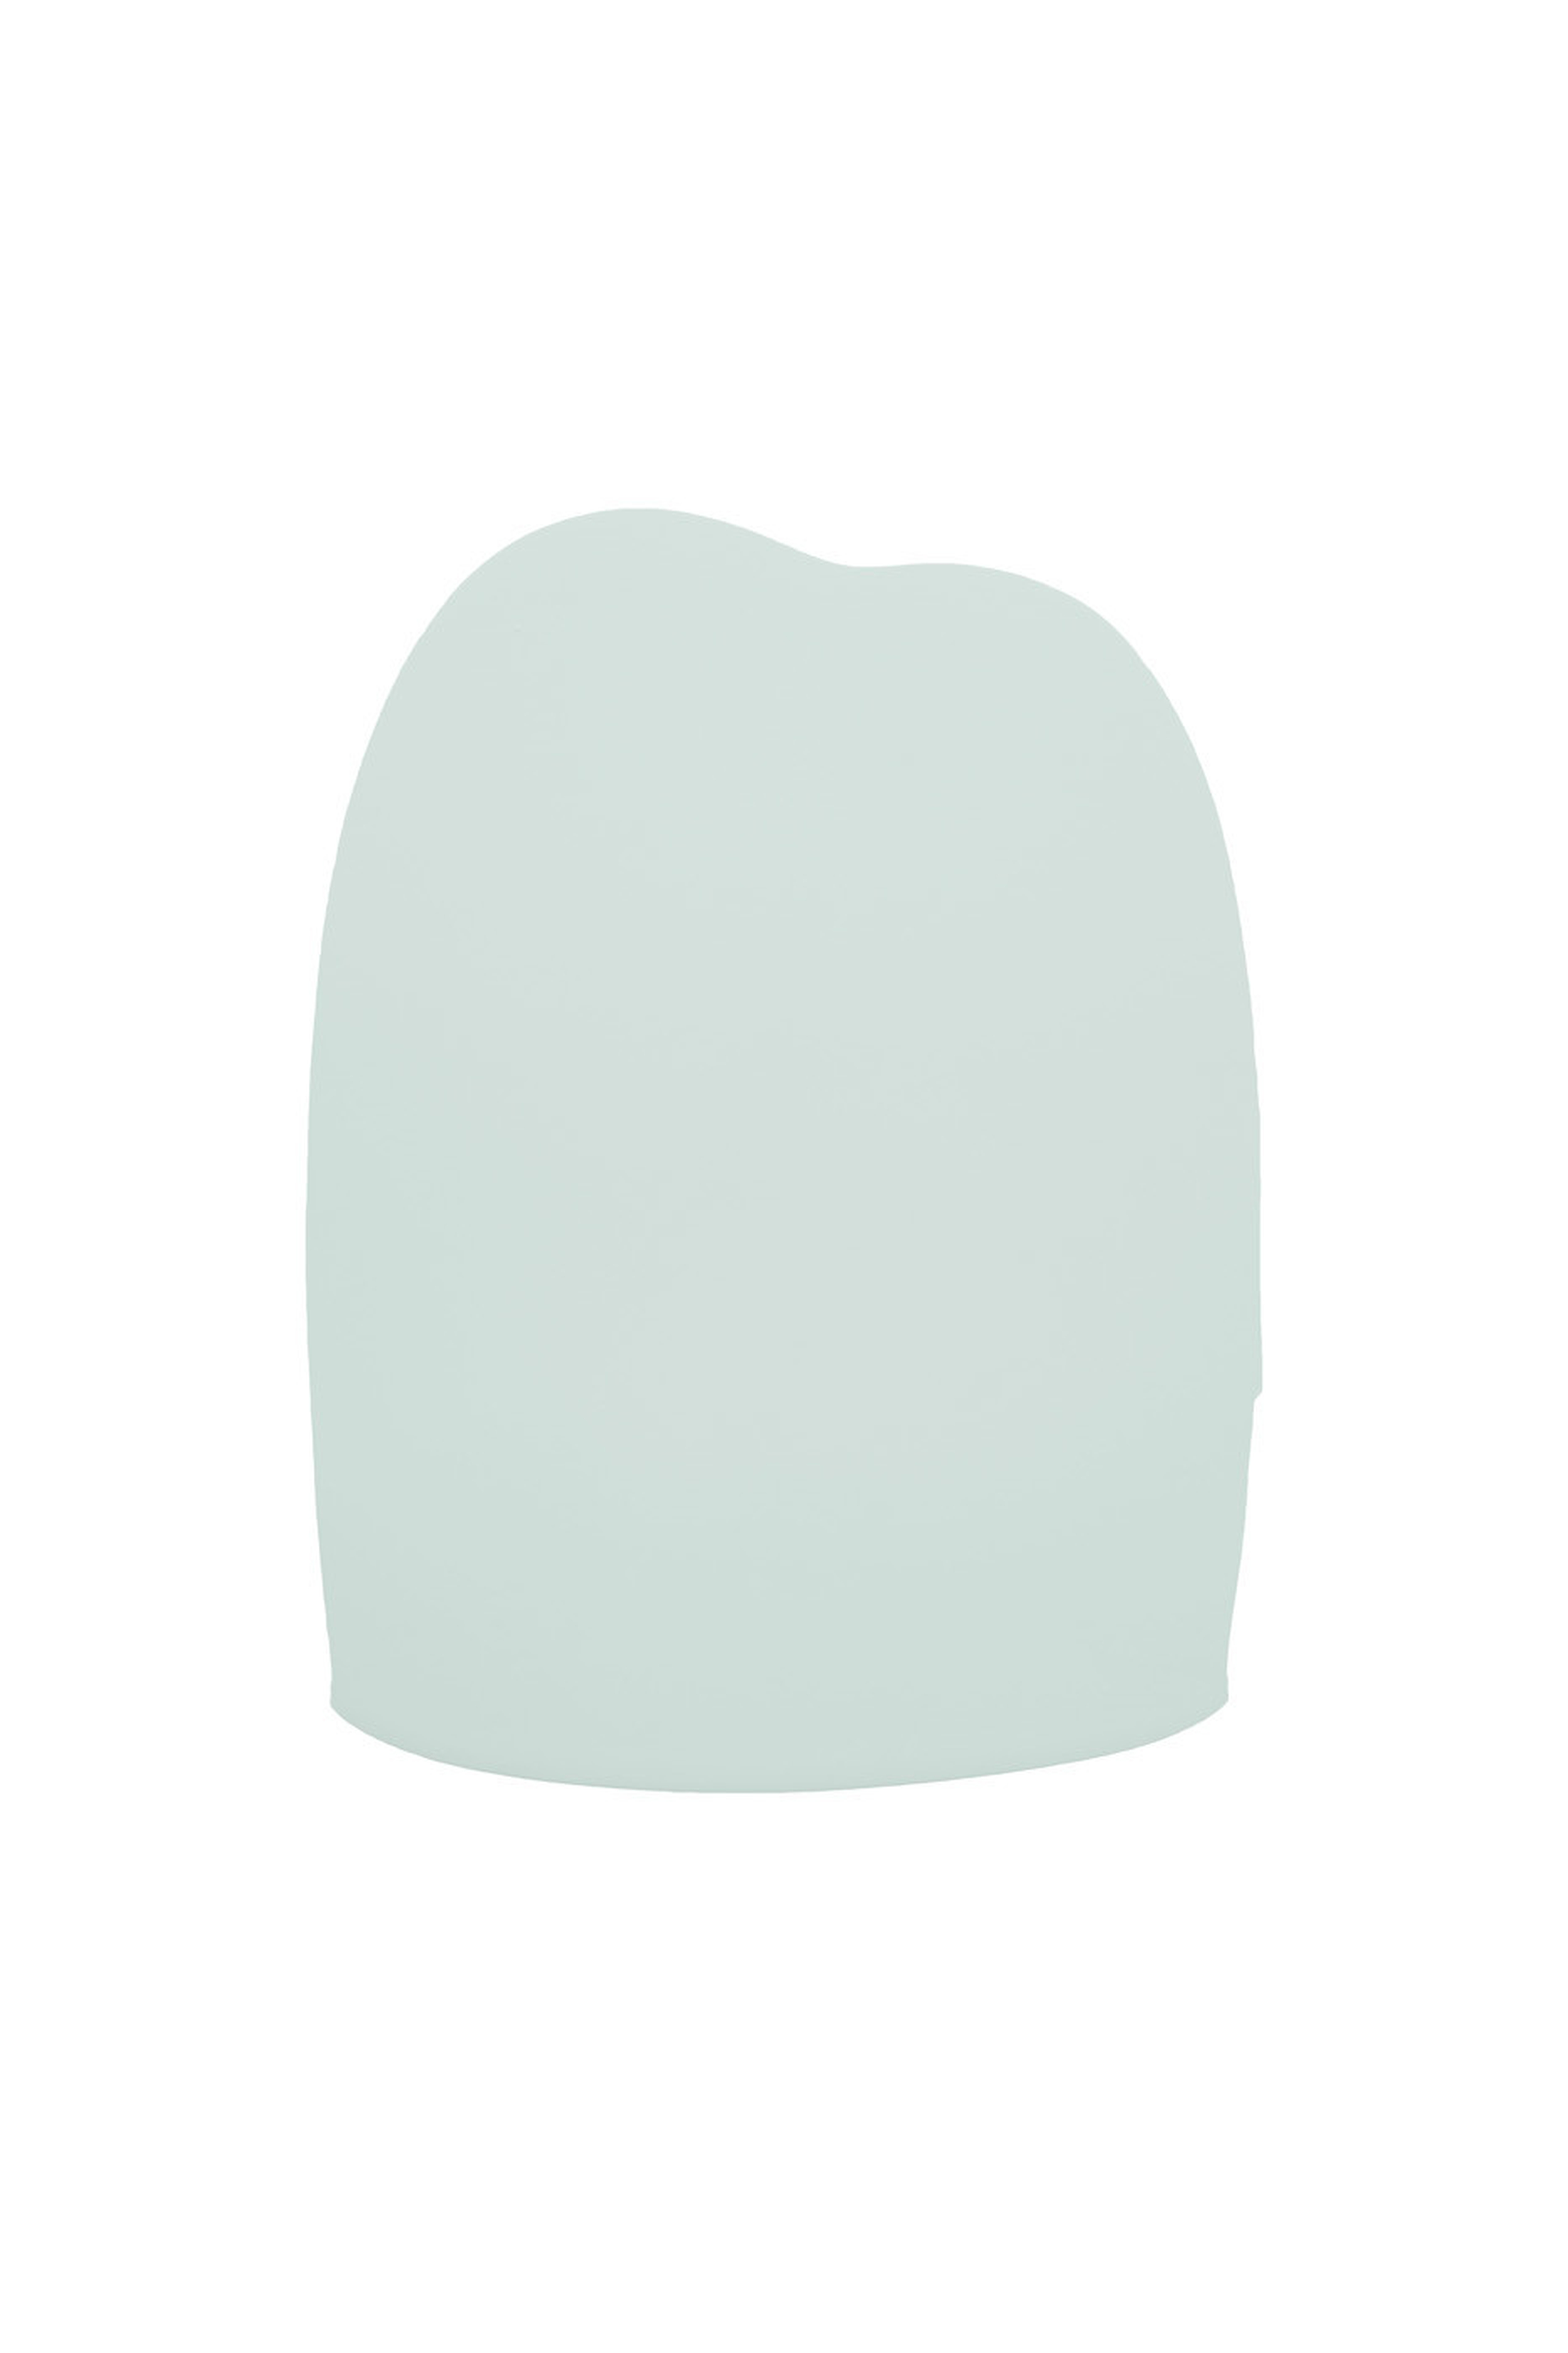 Clare Paint - Headspace - Swatch - Clare Paint